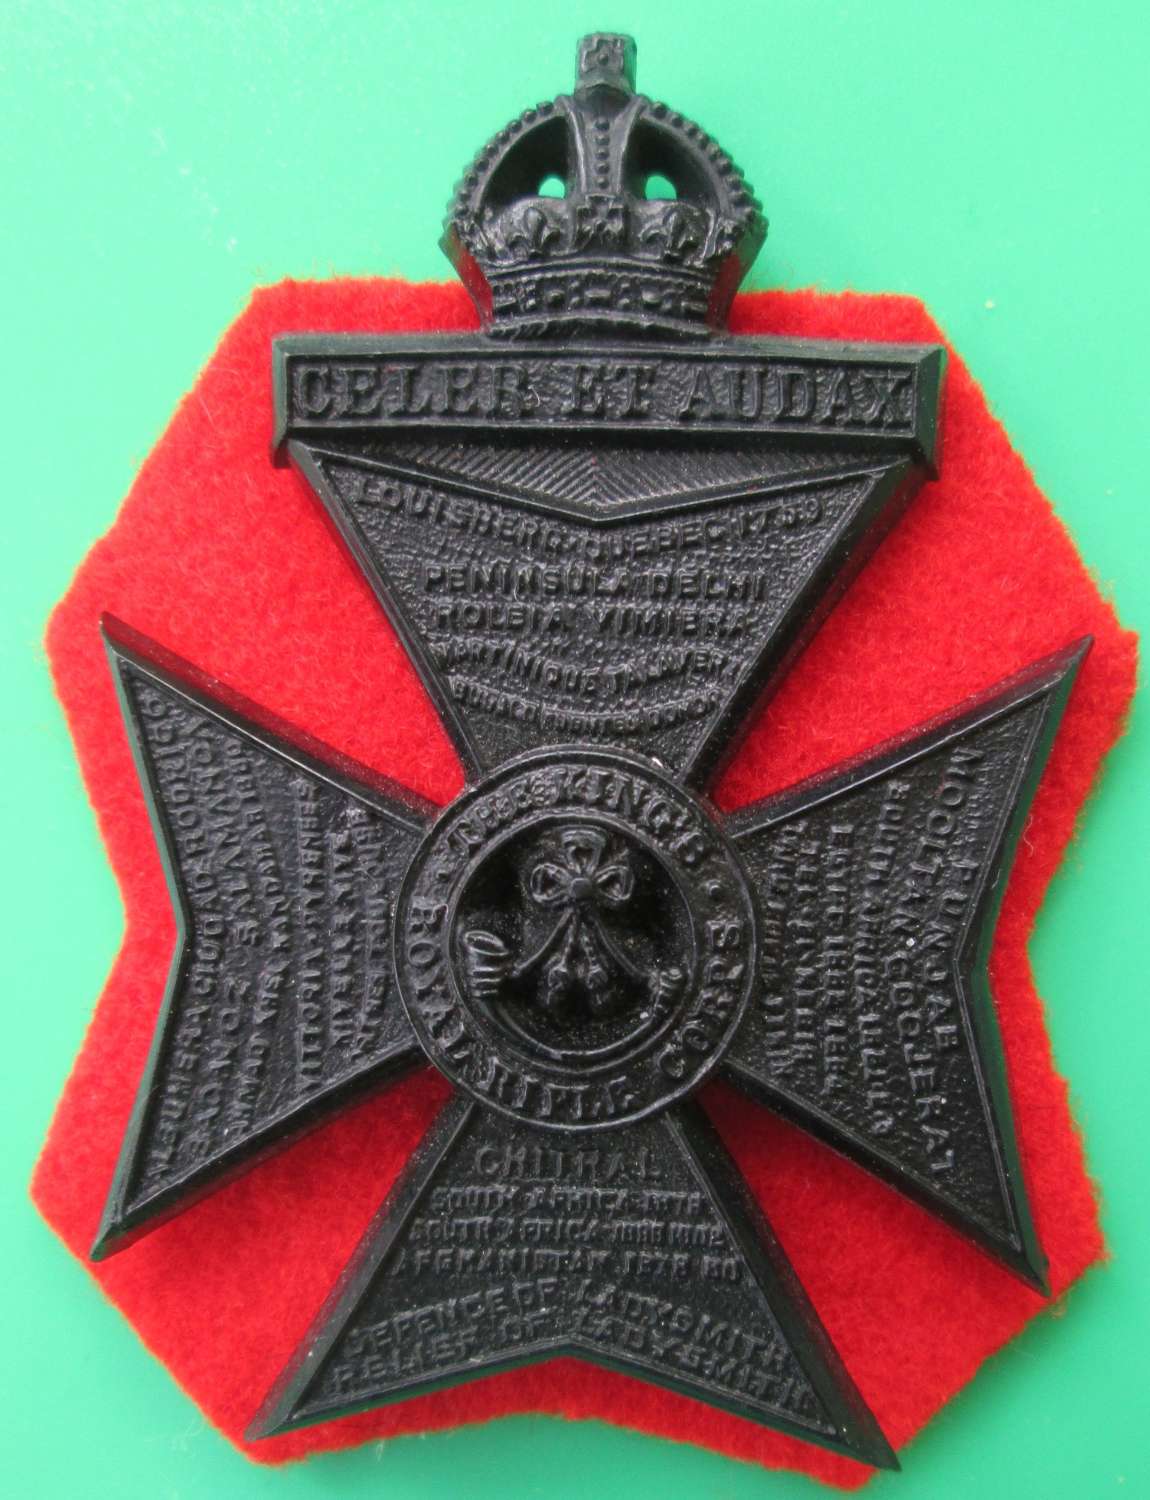 THE KING'S OWN ROYAL RIFLE CORPS PLASTIC CAP BADGE